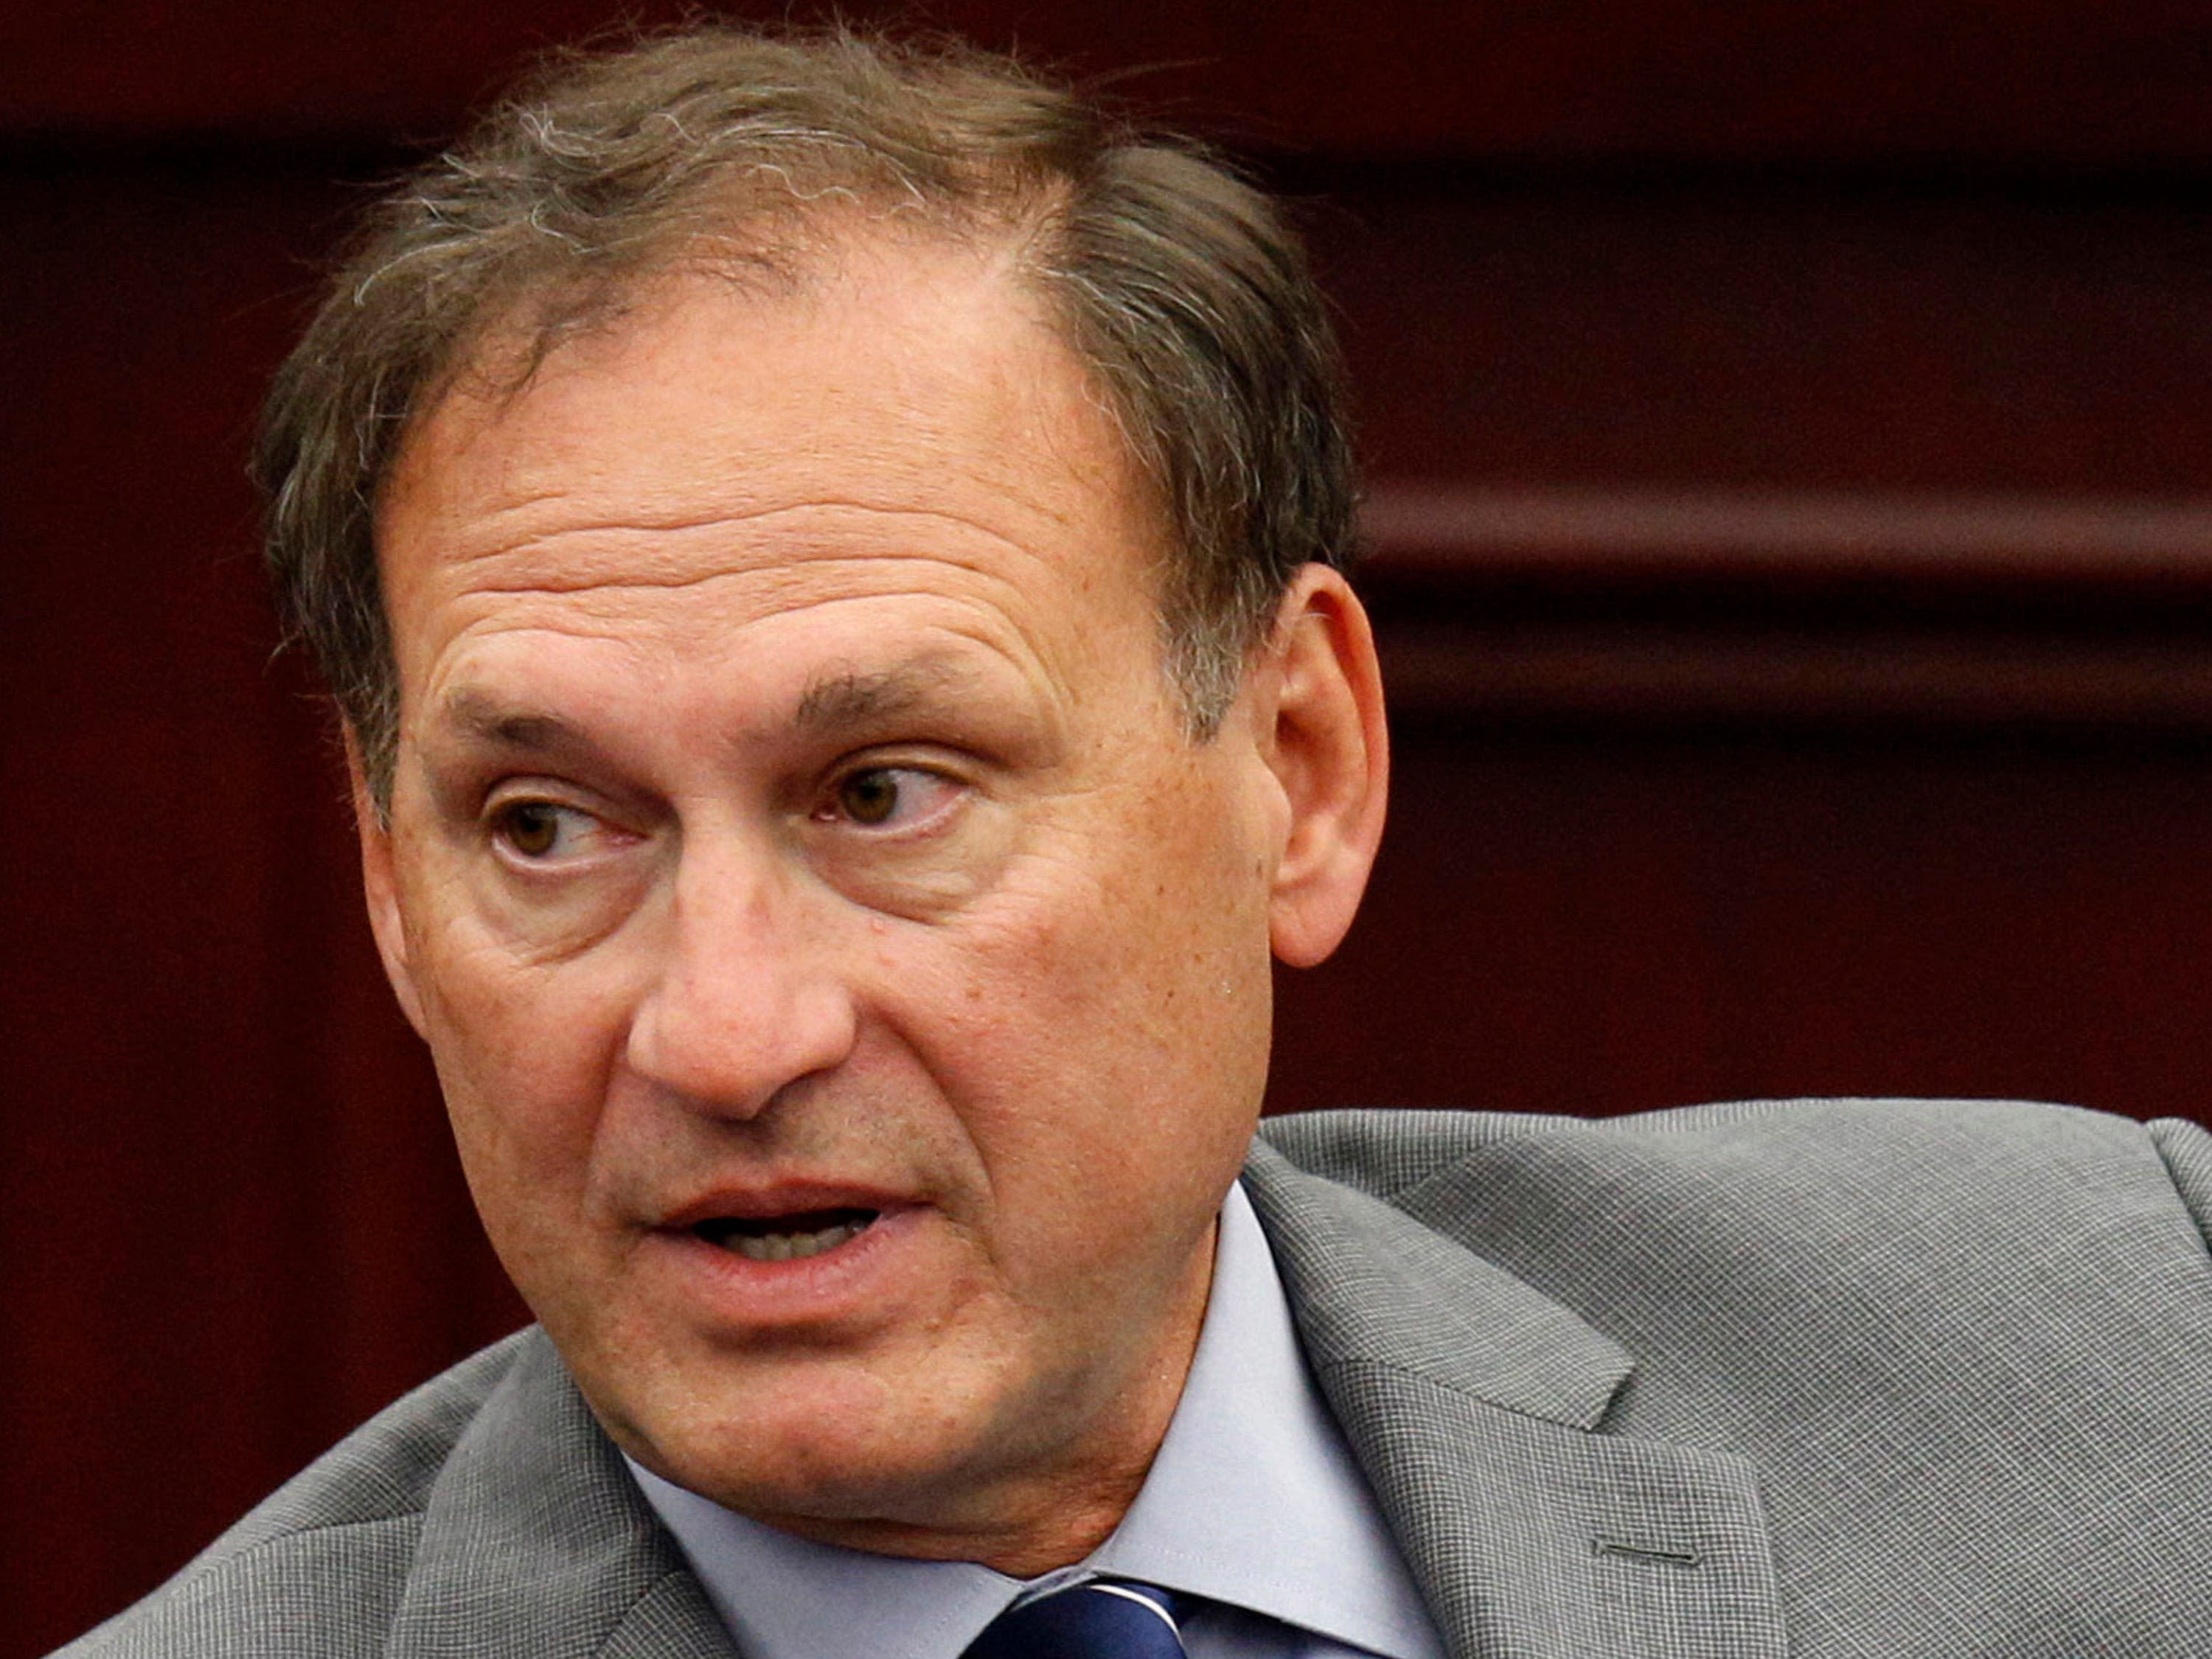 Justice Alito would be disqualified from January 6 cases if he were on a lower court but SCOTUS's rules are 'merely performative,' expert says